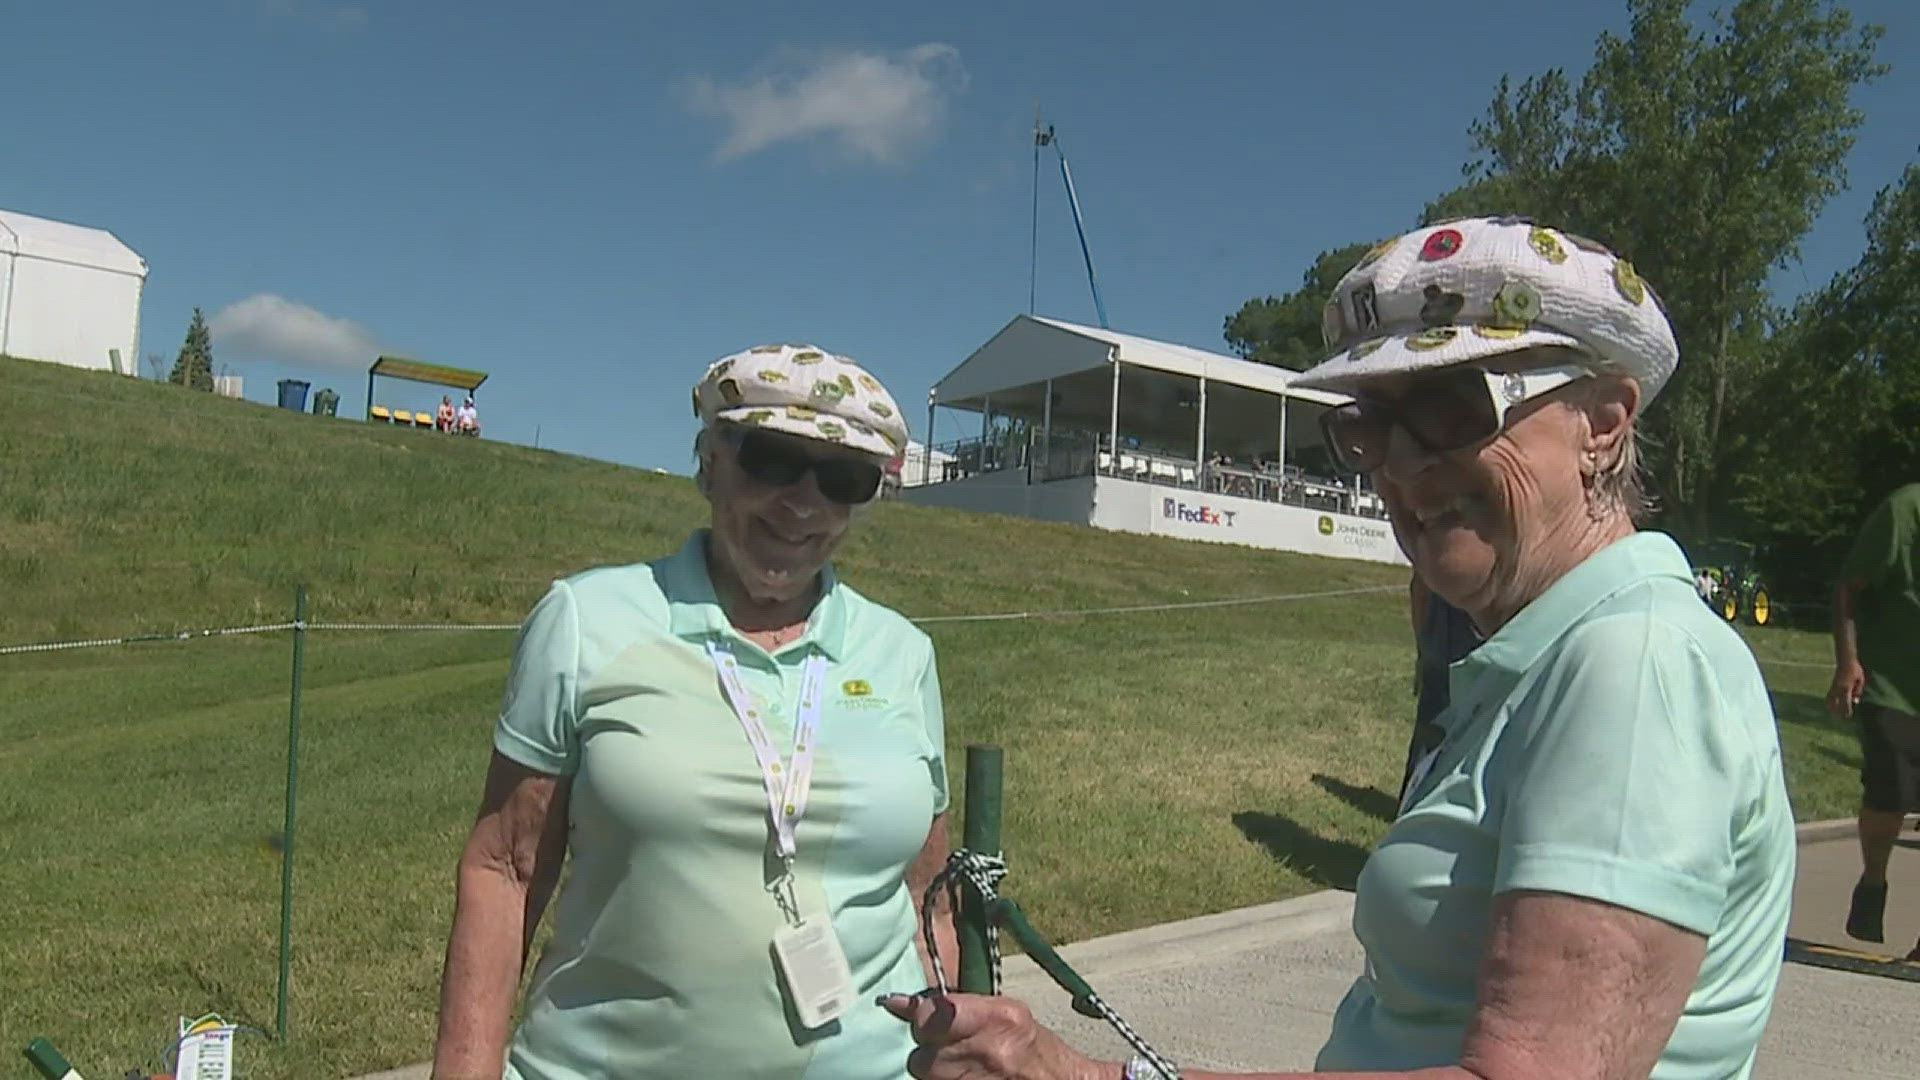 Barbie has been volunteering at the Classic for 20 years. Her good friend Betty — who dons a matching hat — has been volunteering for 18.